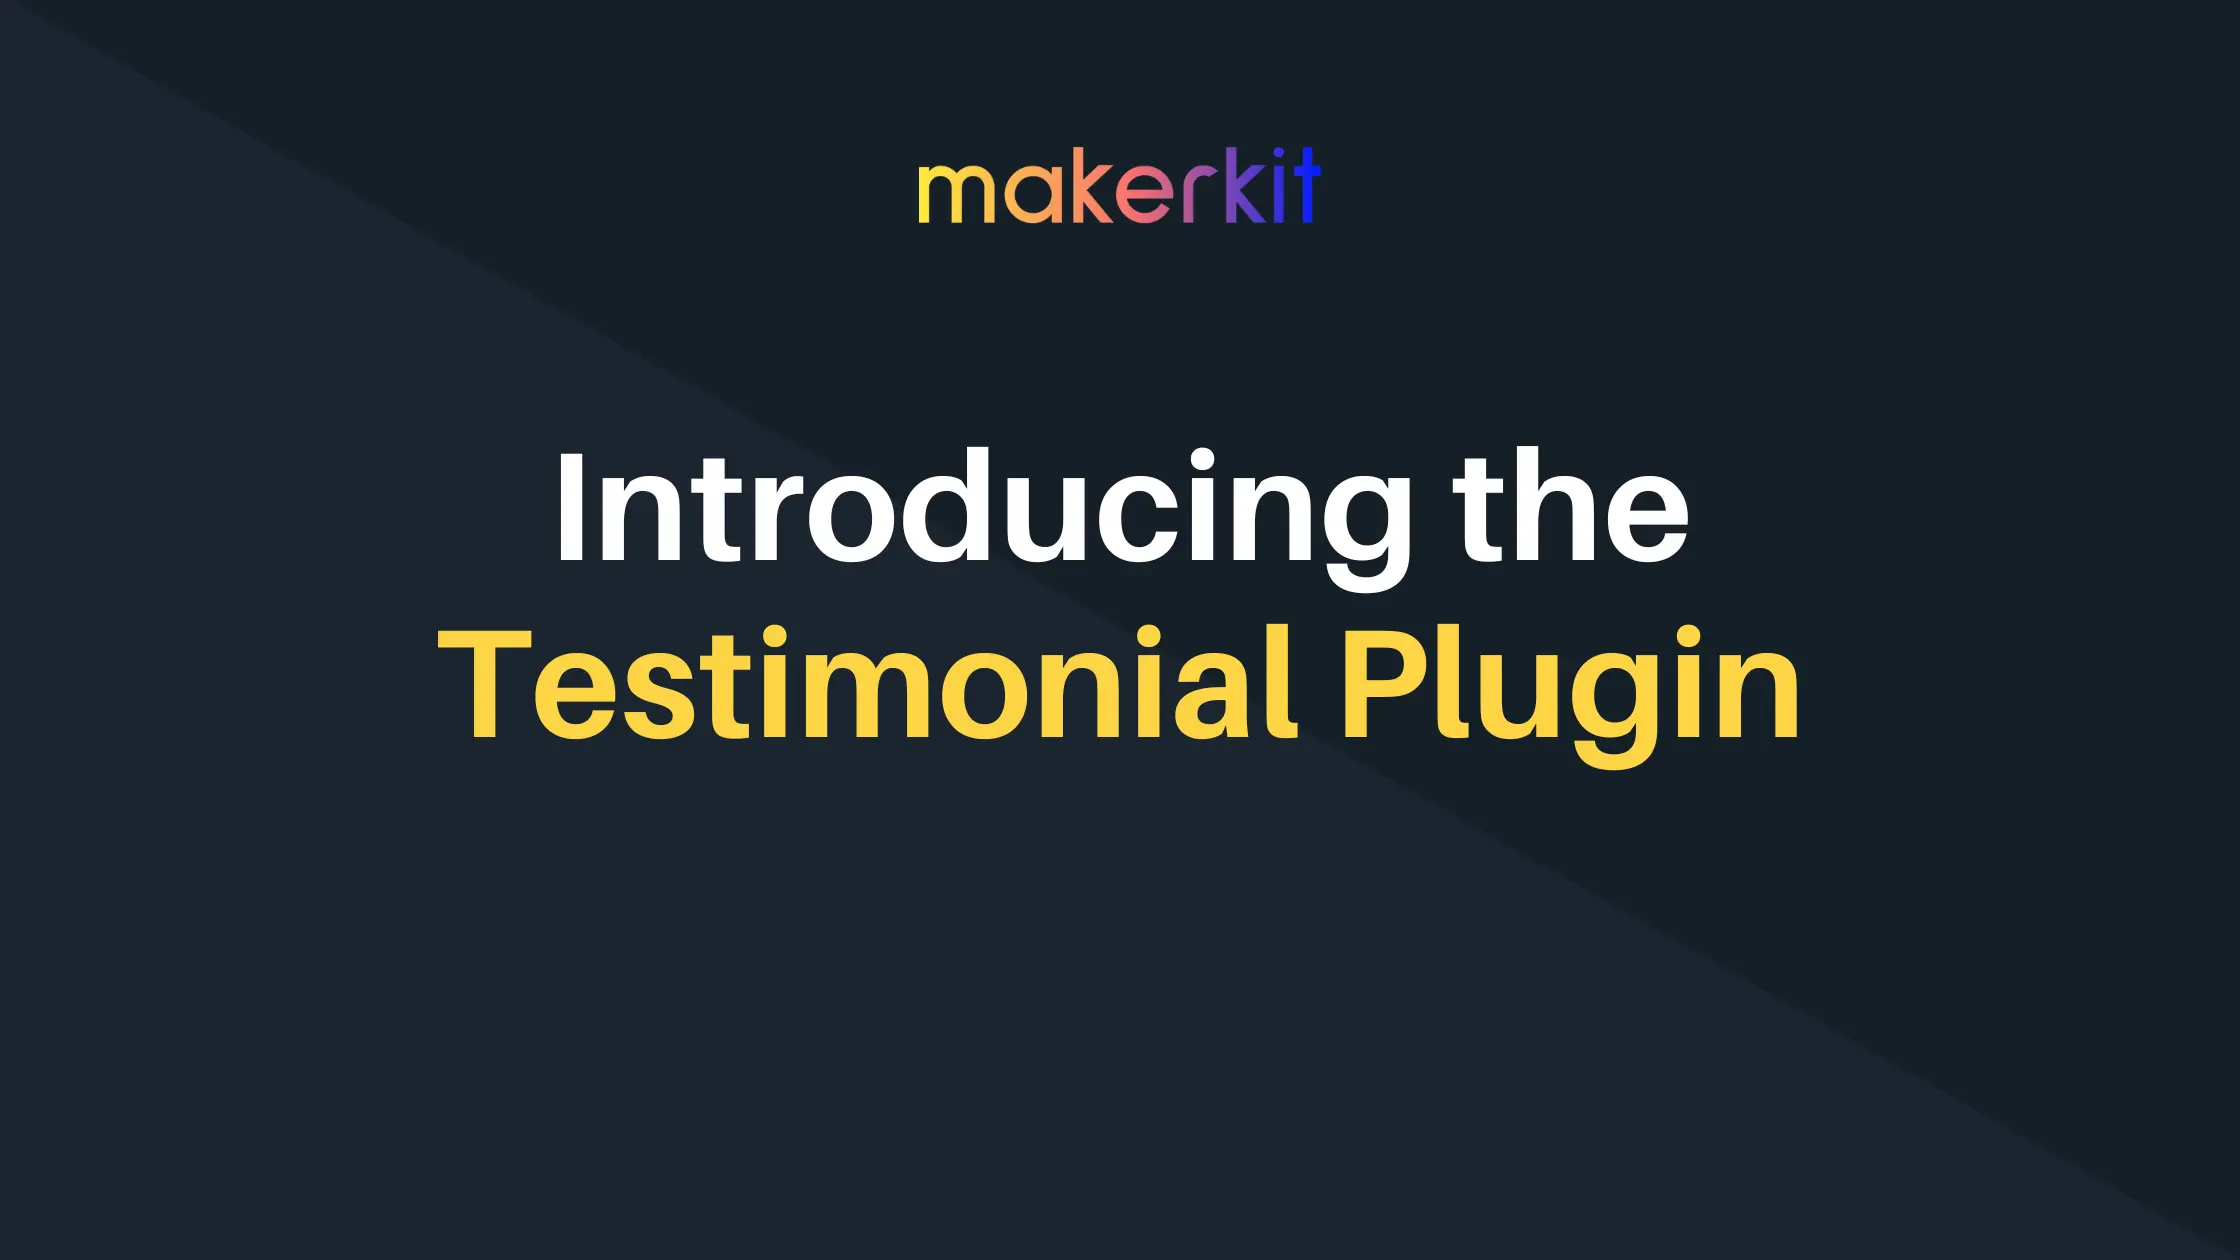 Cover Image for Introducing the Testimonial Plugin for Makerkit